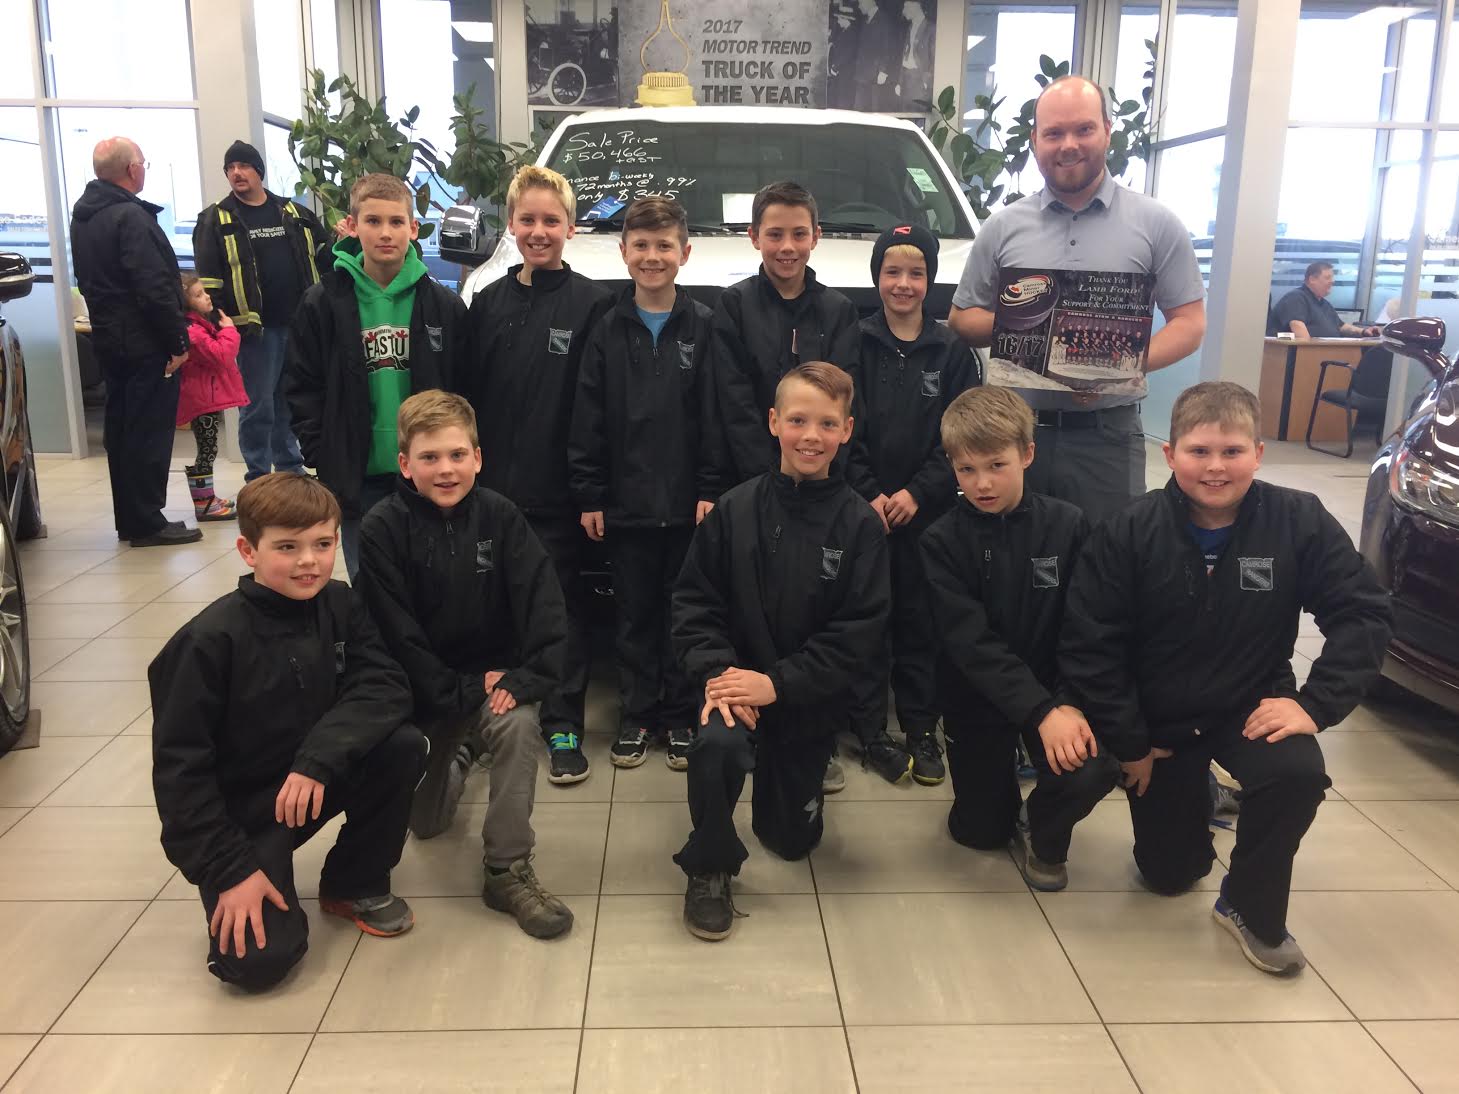 Thank you to Lamb Ford for Sponsoring the Atom A Rangers - 2017